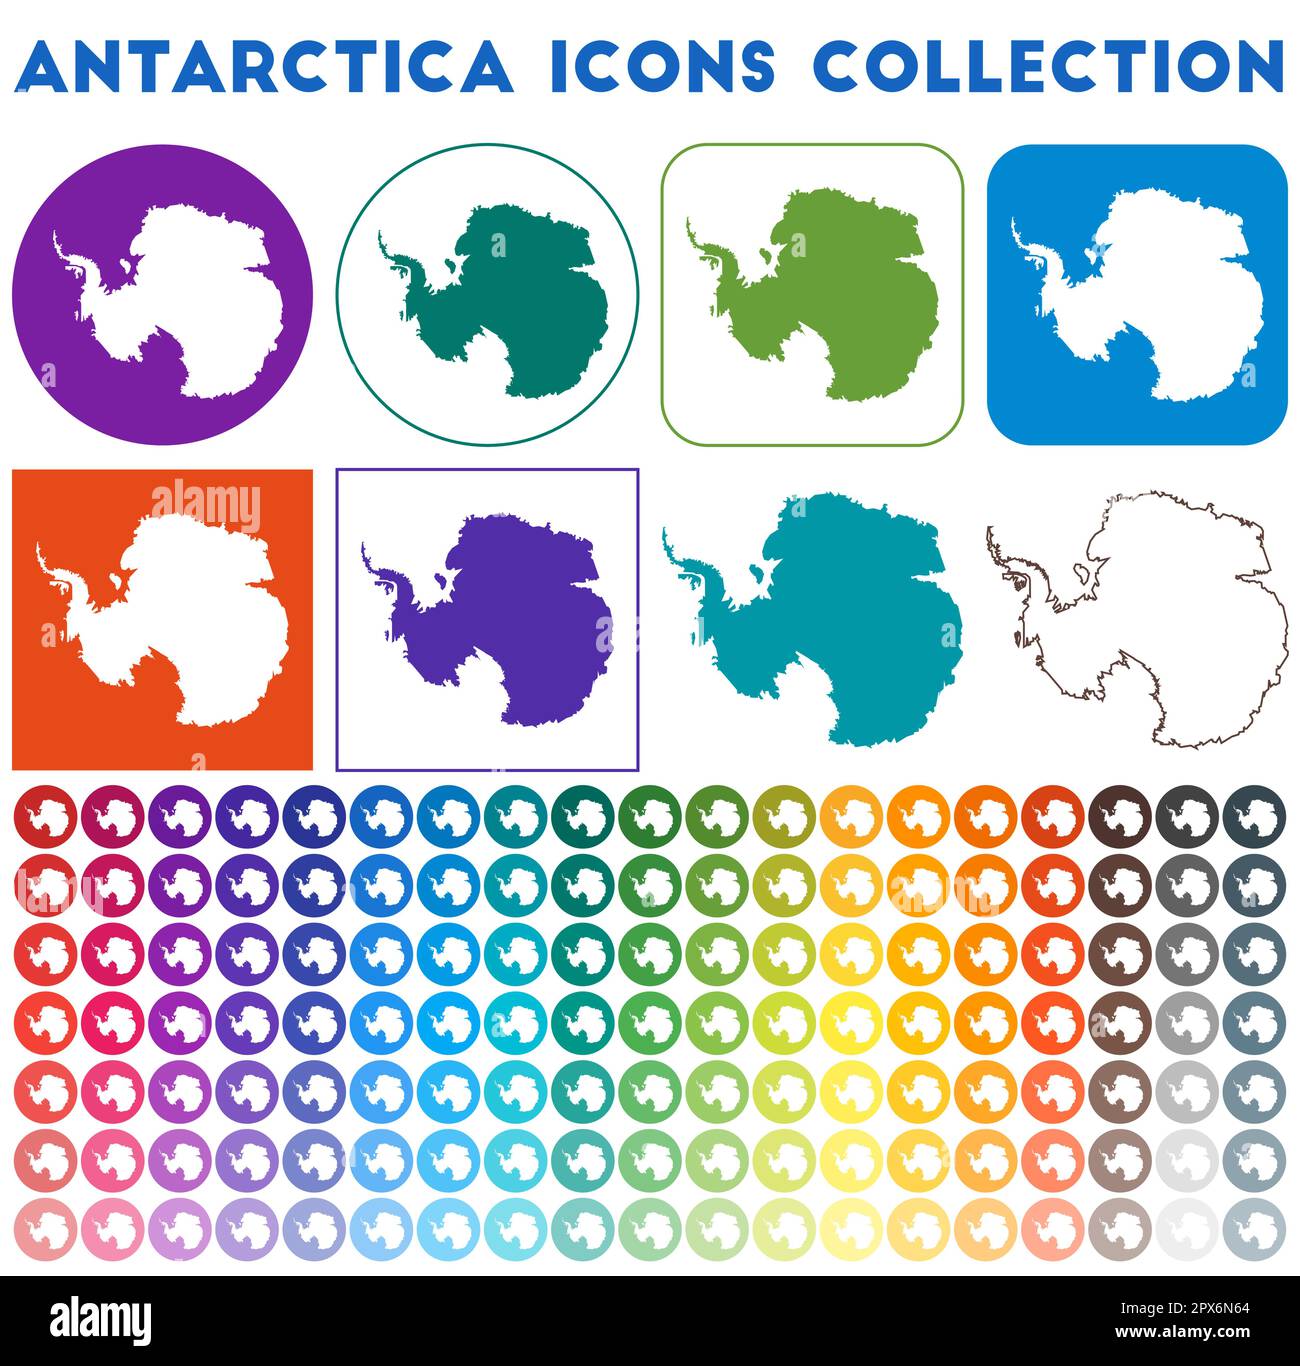 Antarctica icons collection. Bright colourful trendy map icons. Modern Antarctica badge with country map. Vector illustration. Stock Vector